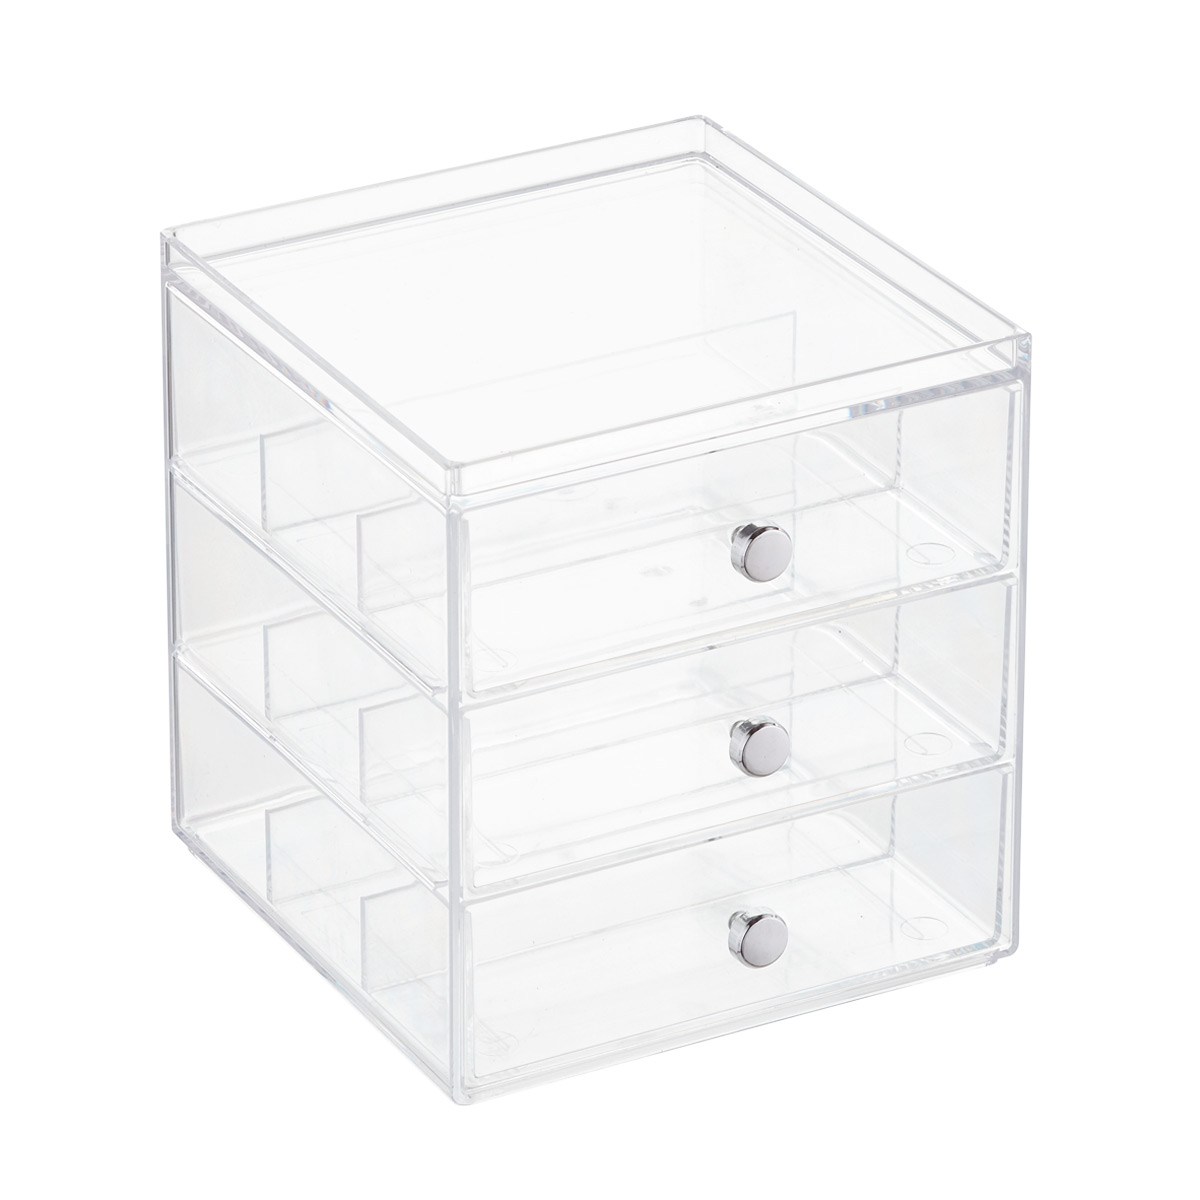 iDESIGN Clarity 3-Drawer Divided Stacking Box Clear